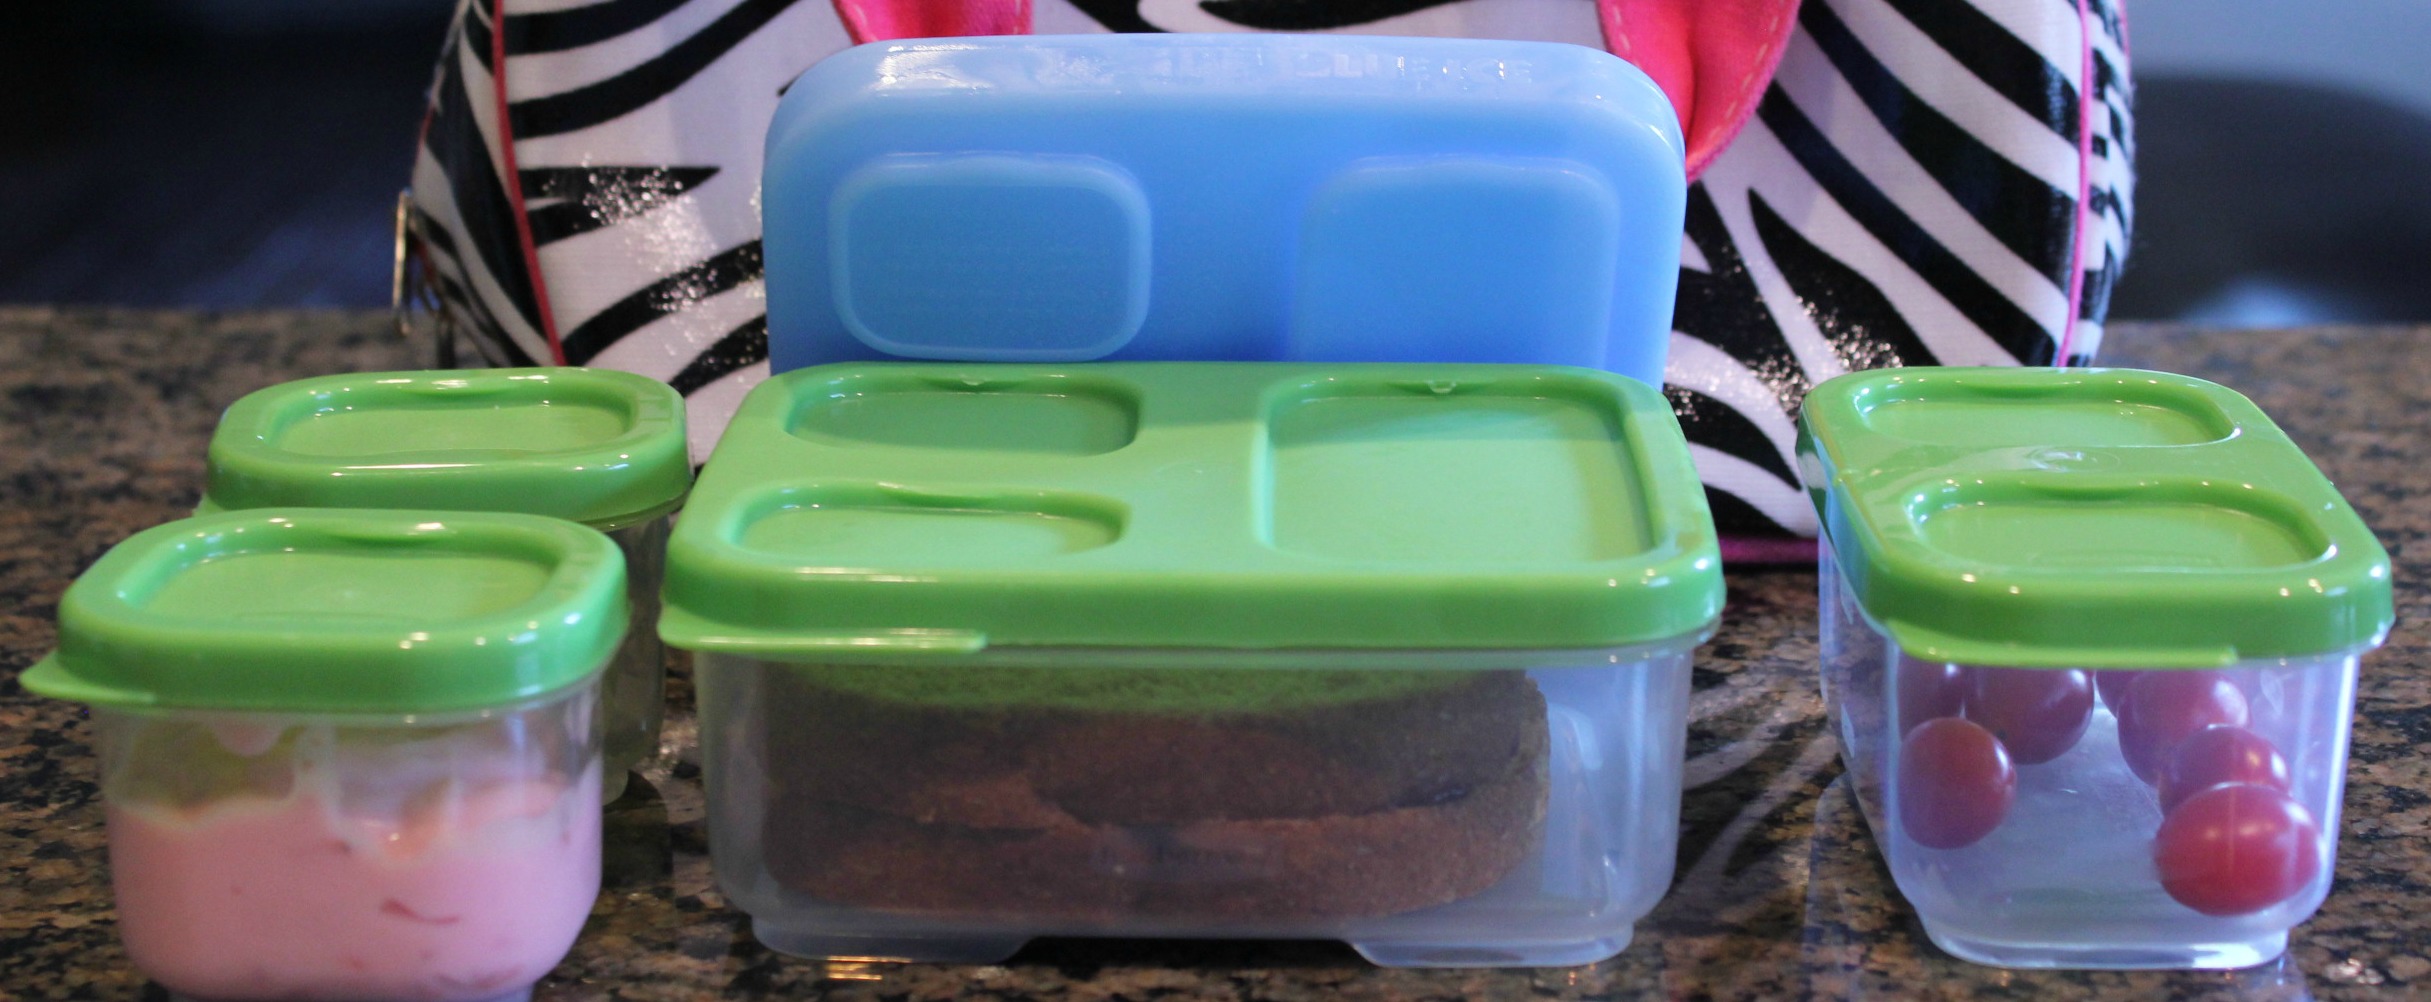 Rubbermaid LunchBlox Kids Lunch Box & Food Prep Containers with